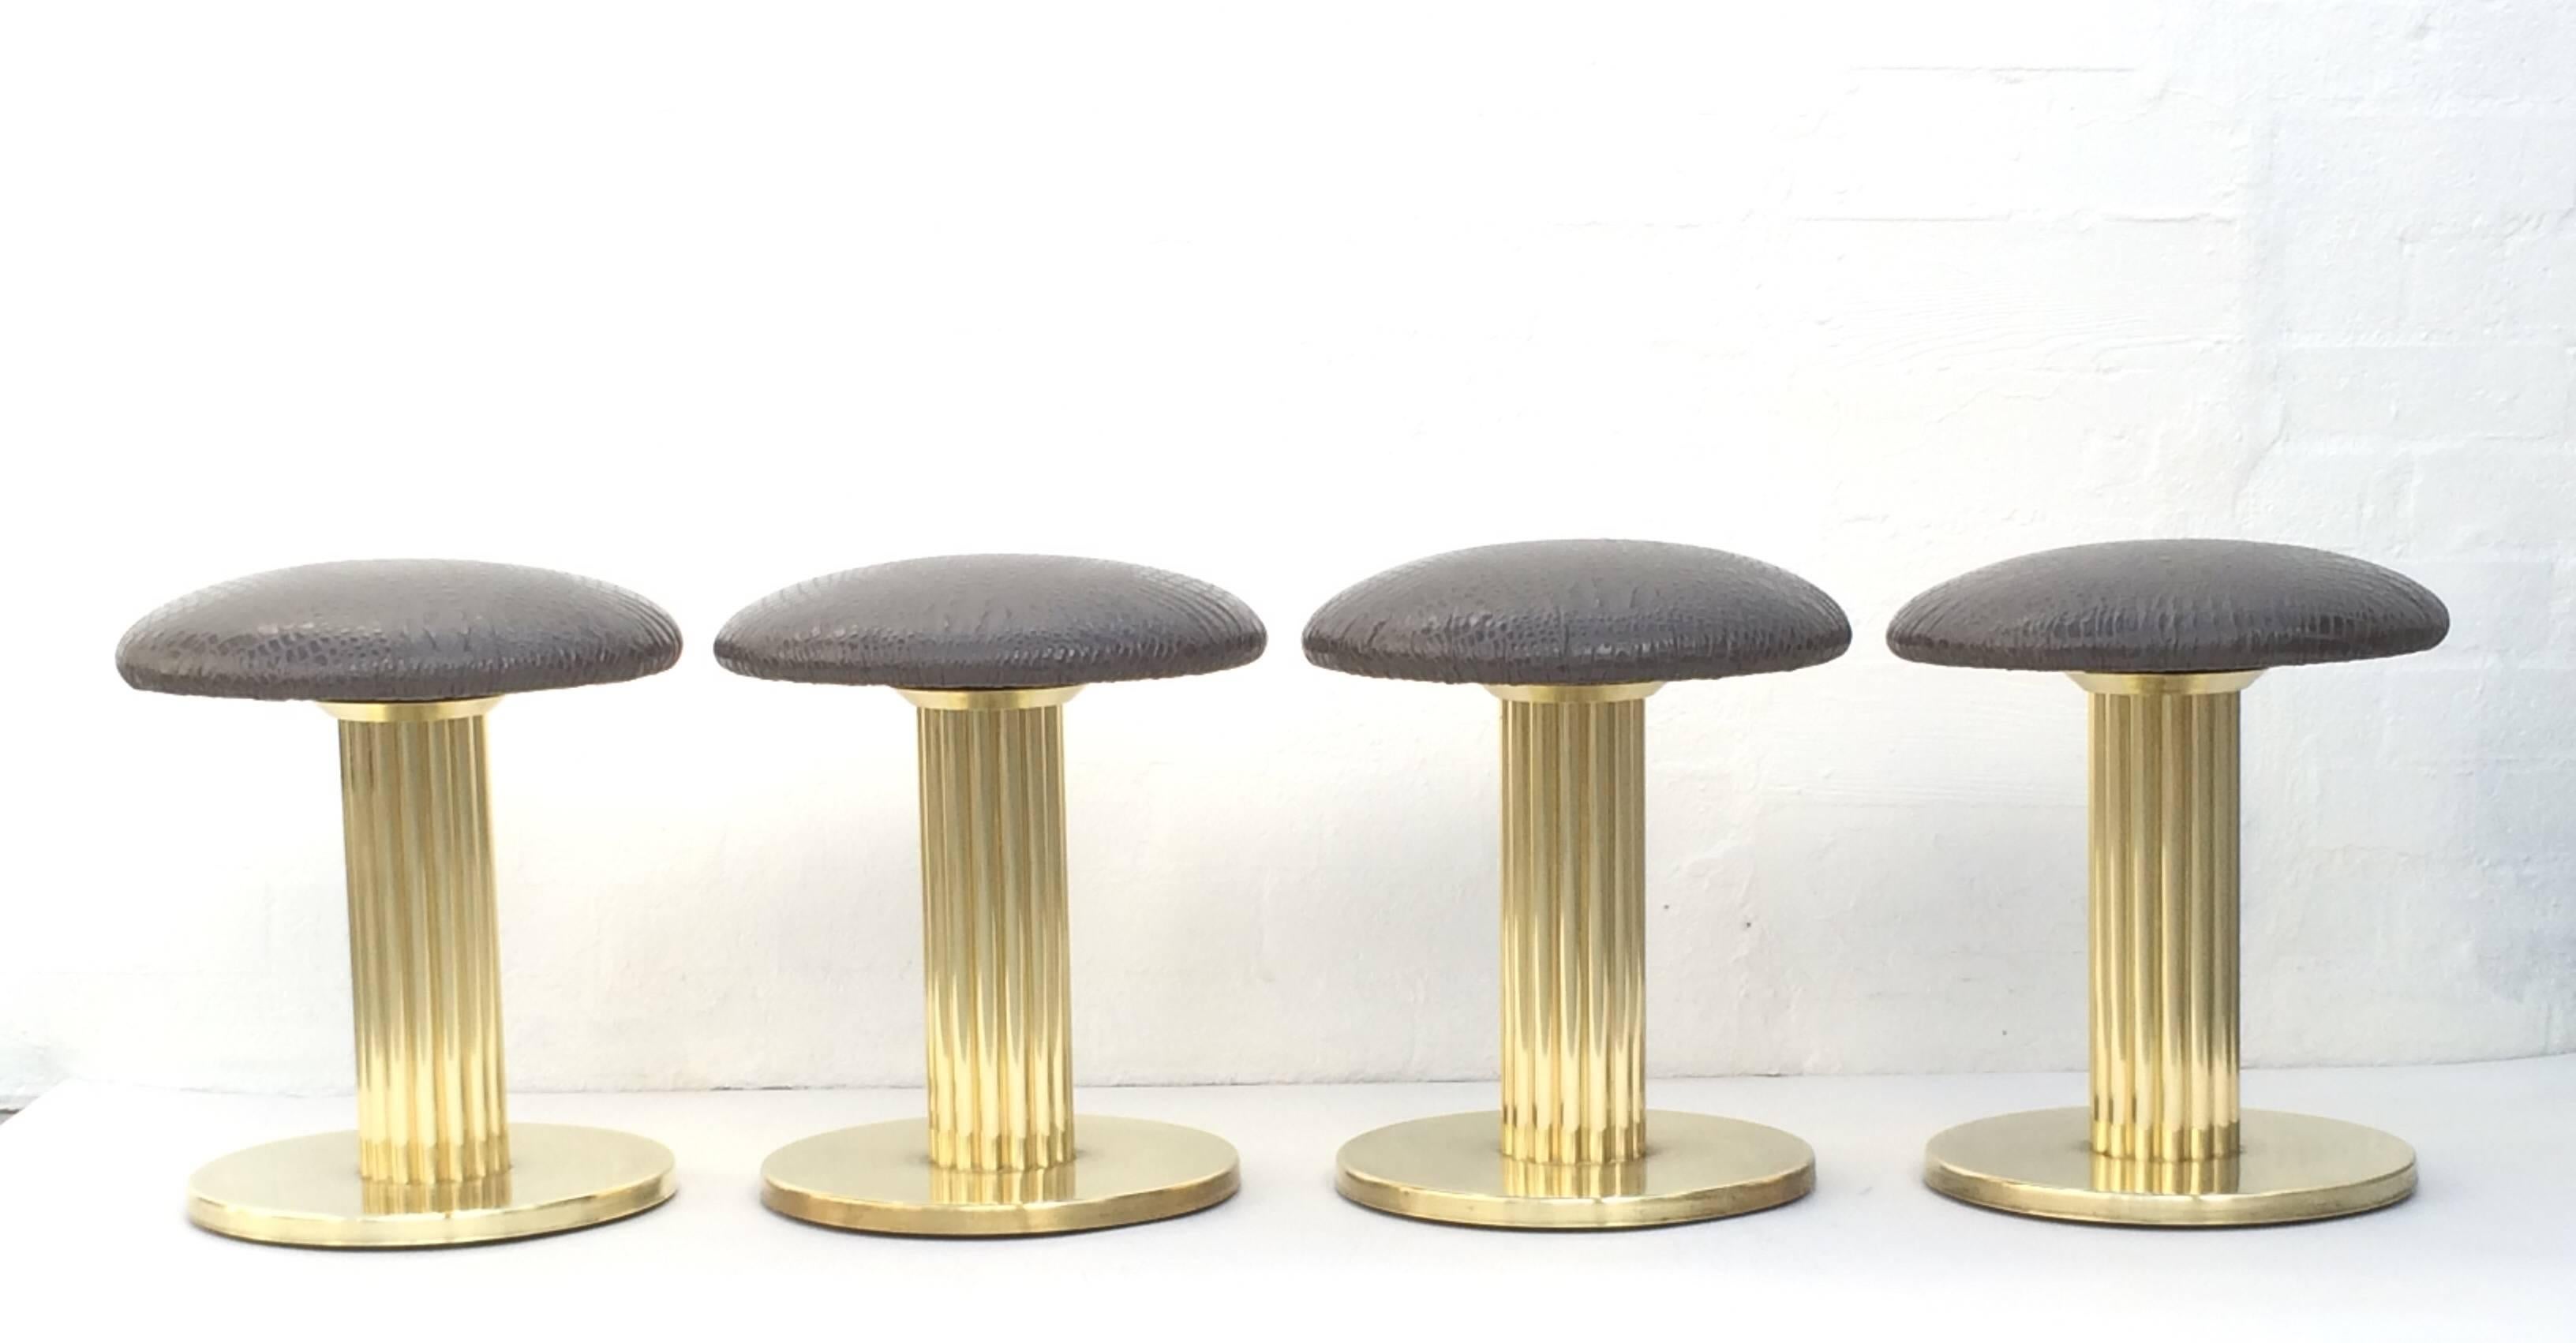 Modern Brass and Leather Swivel Stools by Design for Leisure Ltd